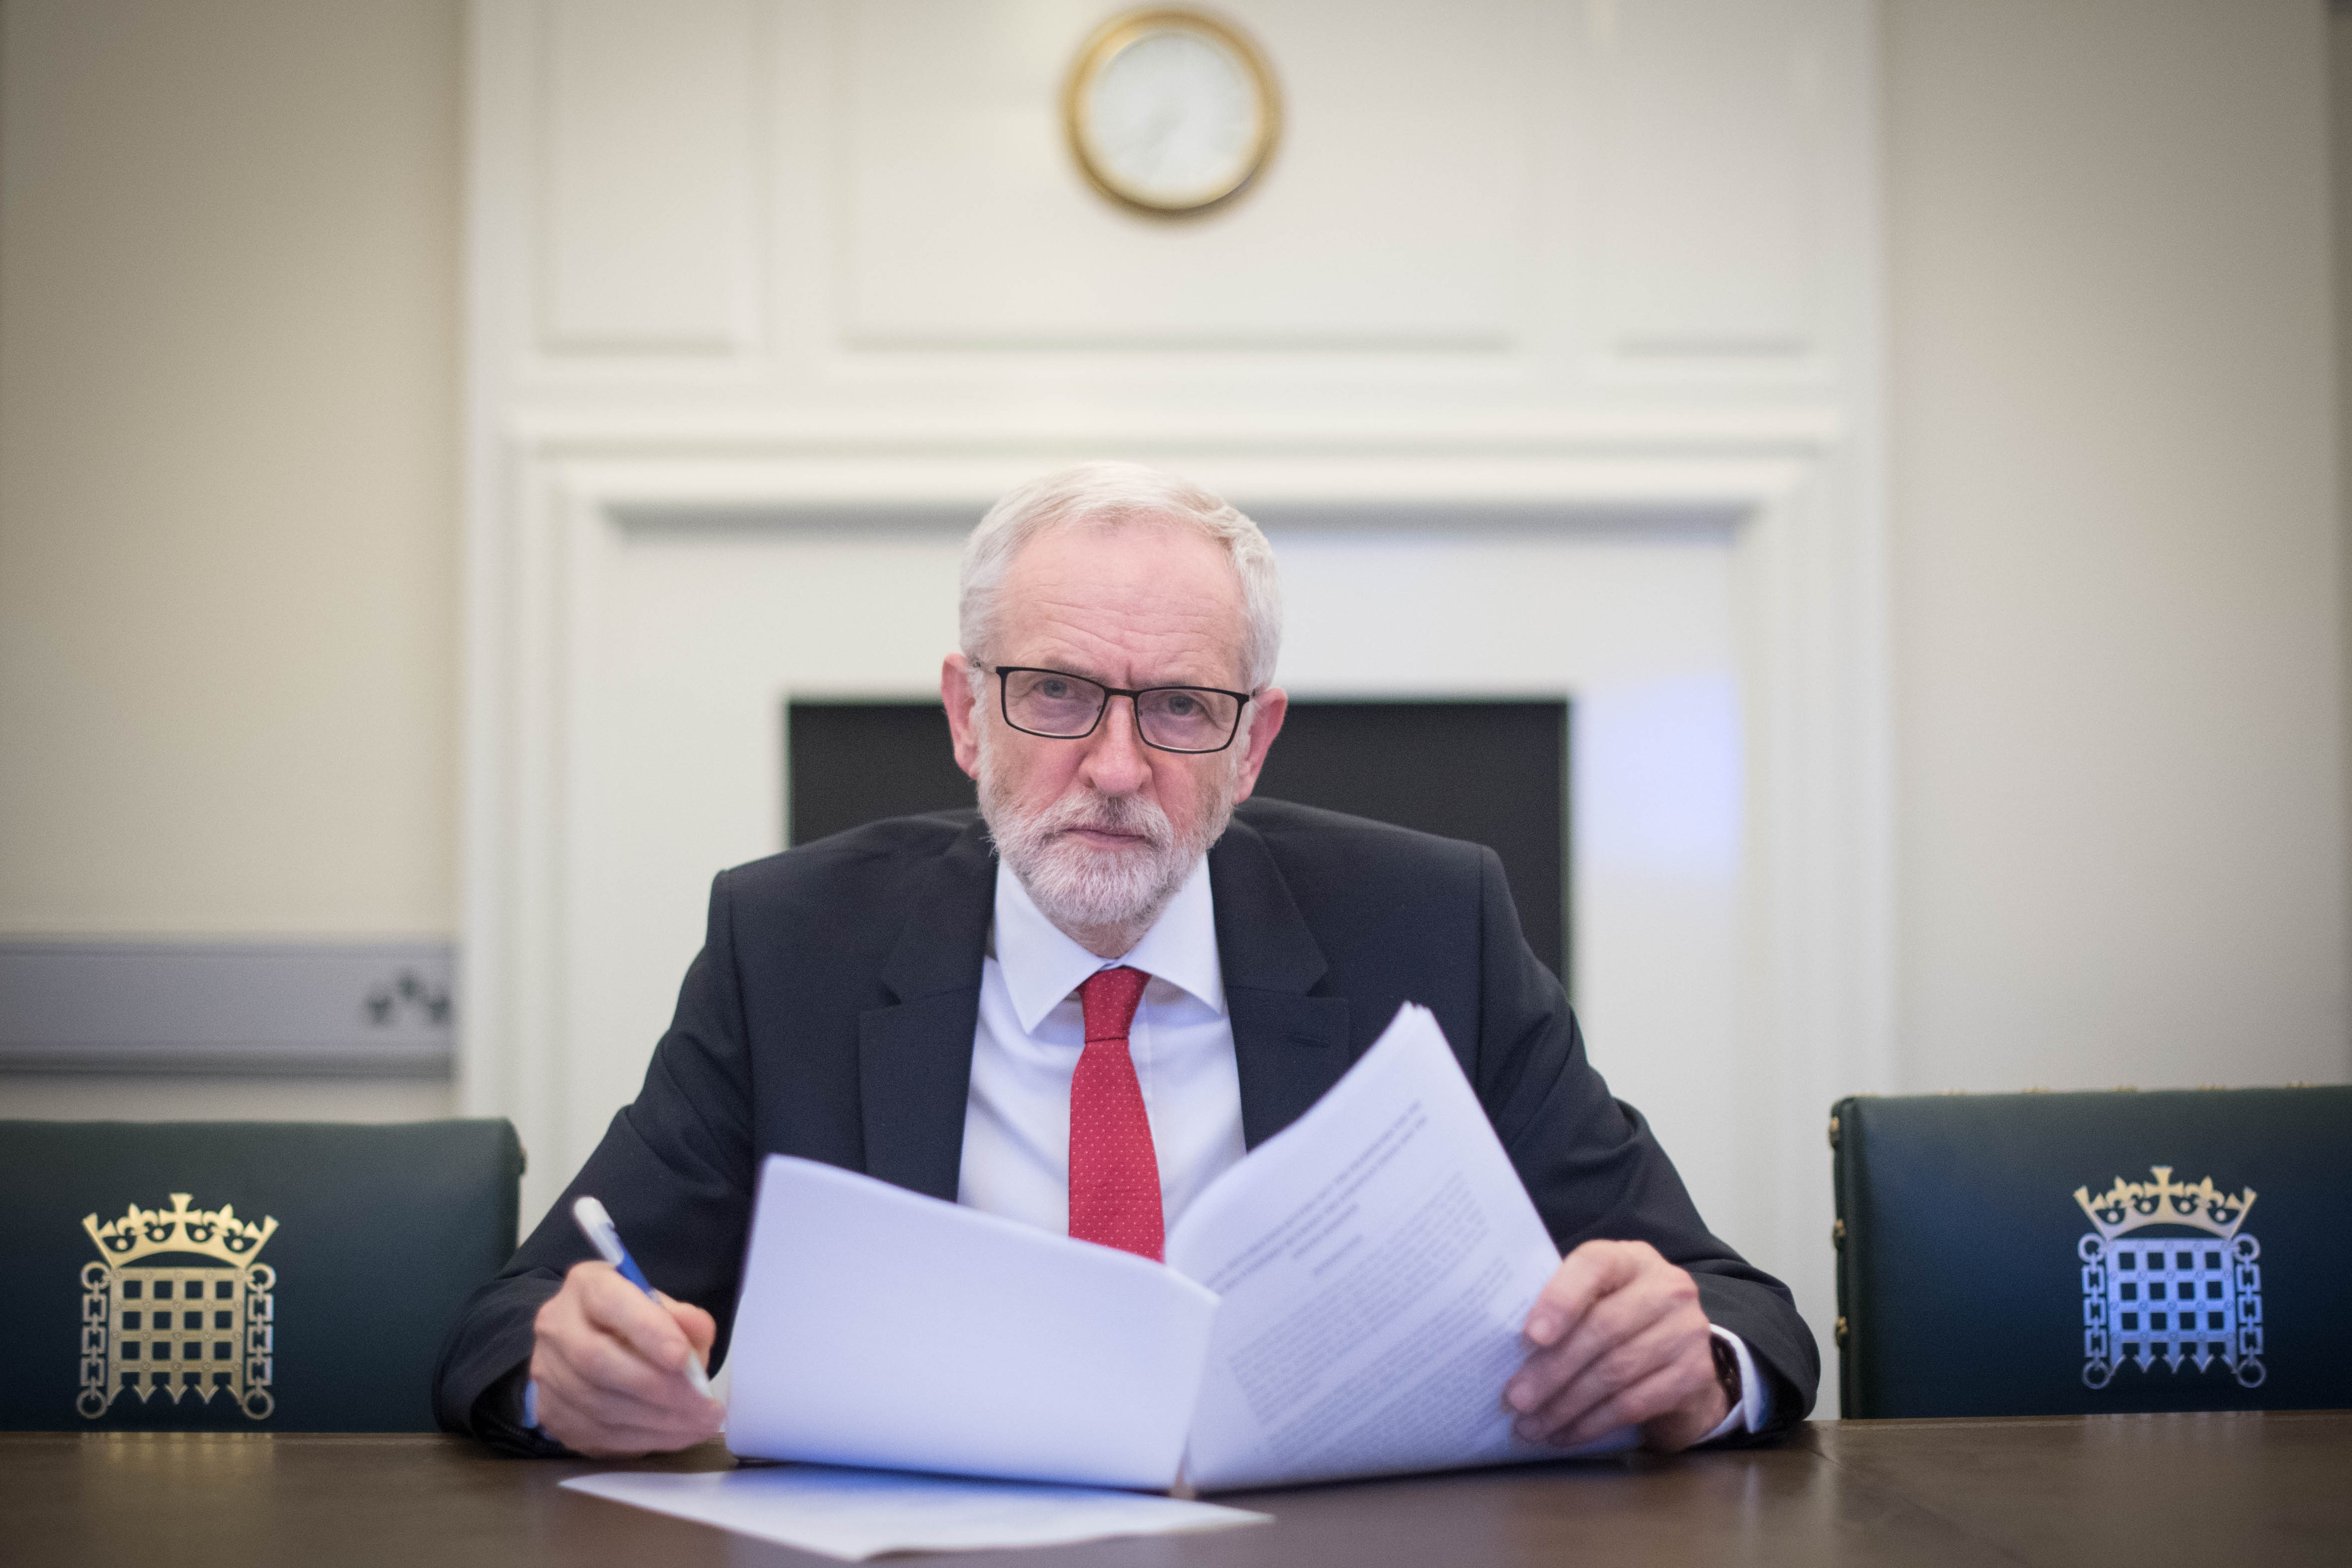 Britain's main opposition Labour Party leader Jeremy Corbyn poses with a copy of the Political Declaration setting out the framework for the future UK-EU relationship, in his office in the Houses of Parliament in London on April 2, 2019. - Prime Minister Theresa May said Tuesday she would ask the EU to delay Brexit again to avoid Britain crashing out of the bloc next week, signalling she could accept a closer relationship with Europe to break months of political deadlock. In a move which enraged the Brexit-supporting wing of her Conservative Party, she also offered to work with Labour main opposition leader Jeremy Corbyn, who favours closer ties with the European Union. Corbyn responded saying he was "very happy" to meet. (Photo by Stefan Rousseau / POOL / AFP) (Photo credit should read STEFAN ROUSSEAU/AFP/Getty Images)